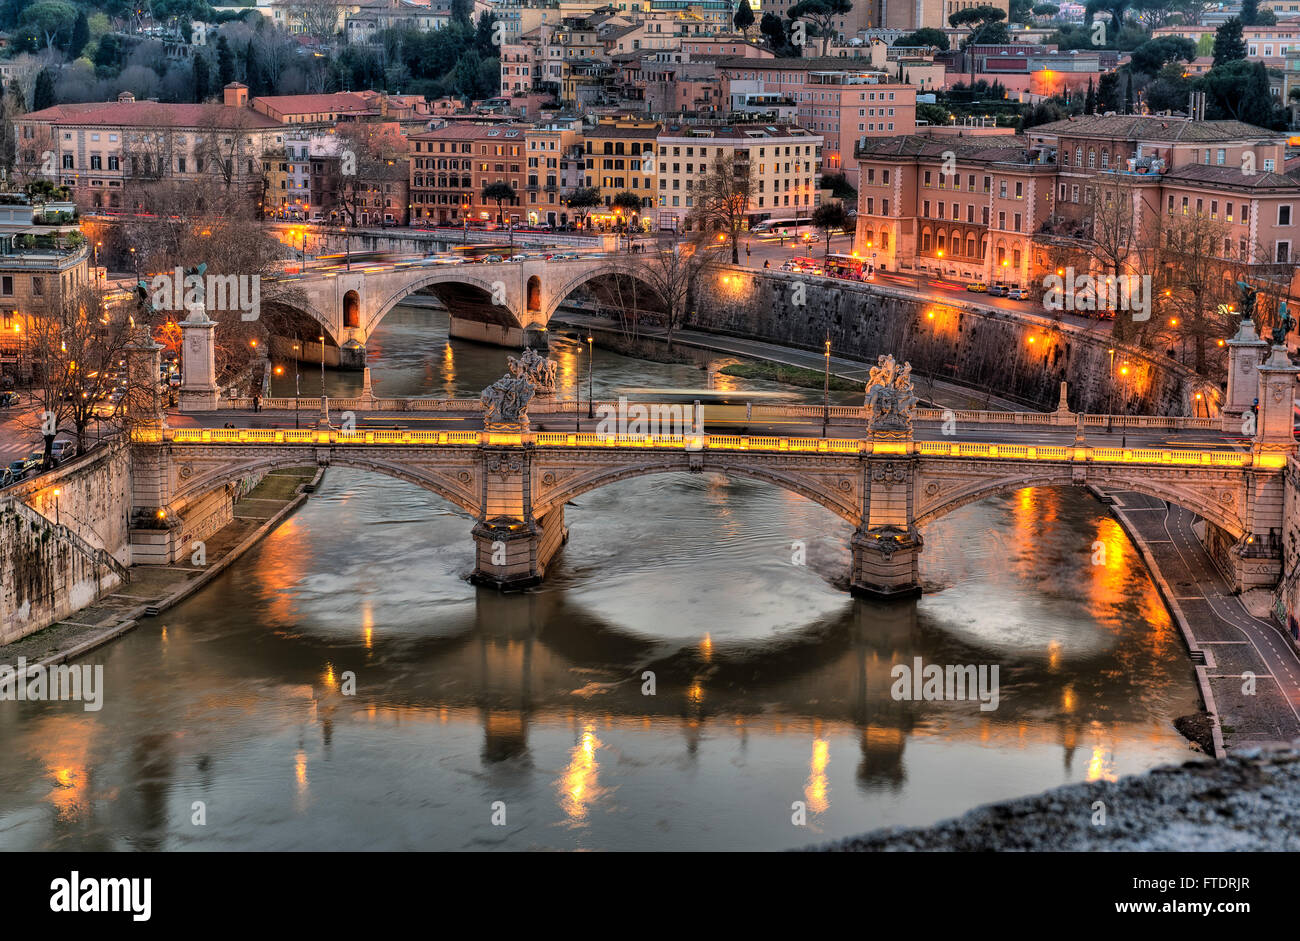 Roma, Italy. Night image of the bridge Vittorio Emanuele close to the Vatican, photographed from Castel Sant'Angelo Terrace. Stock Photo